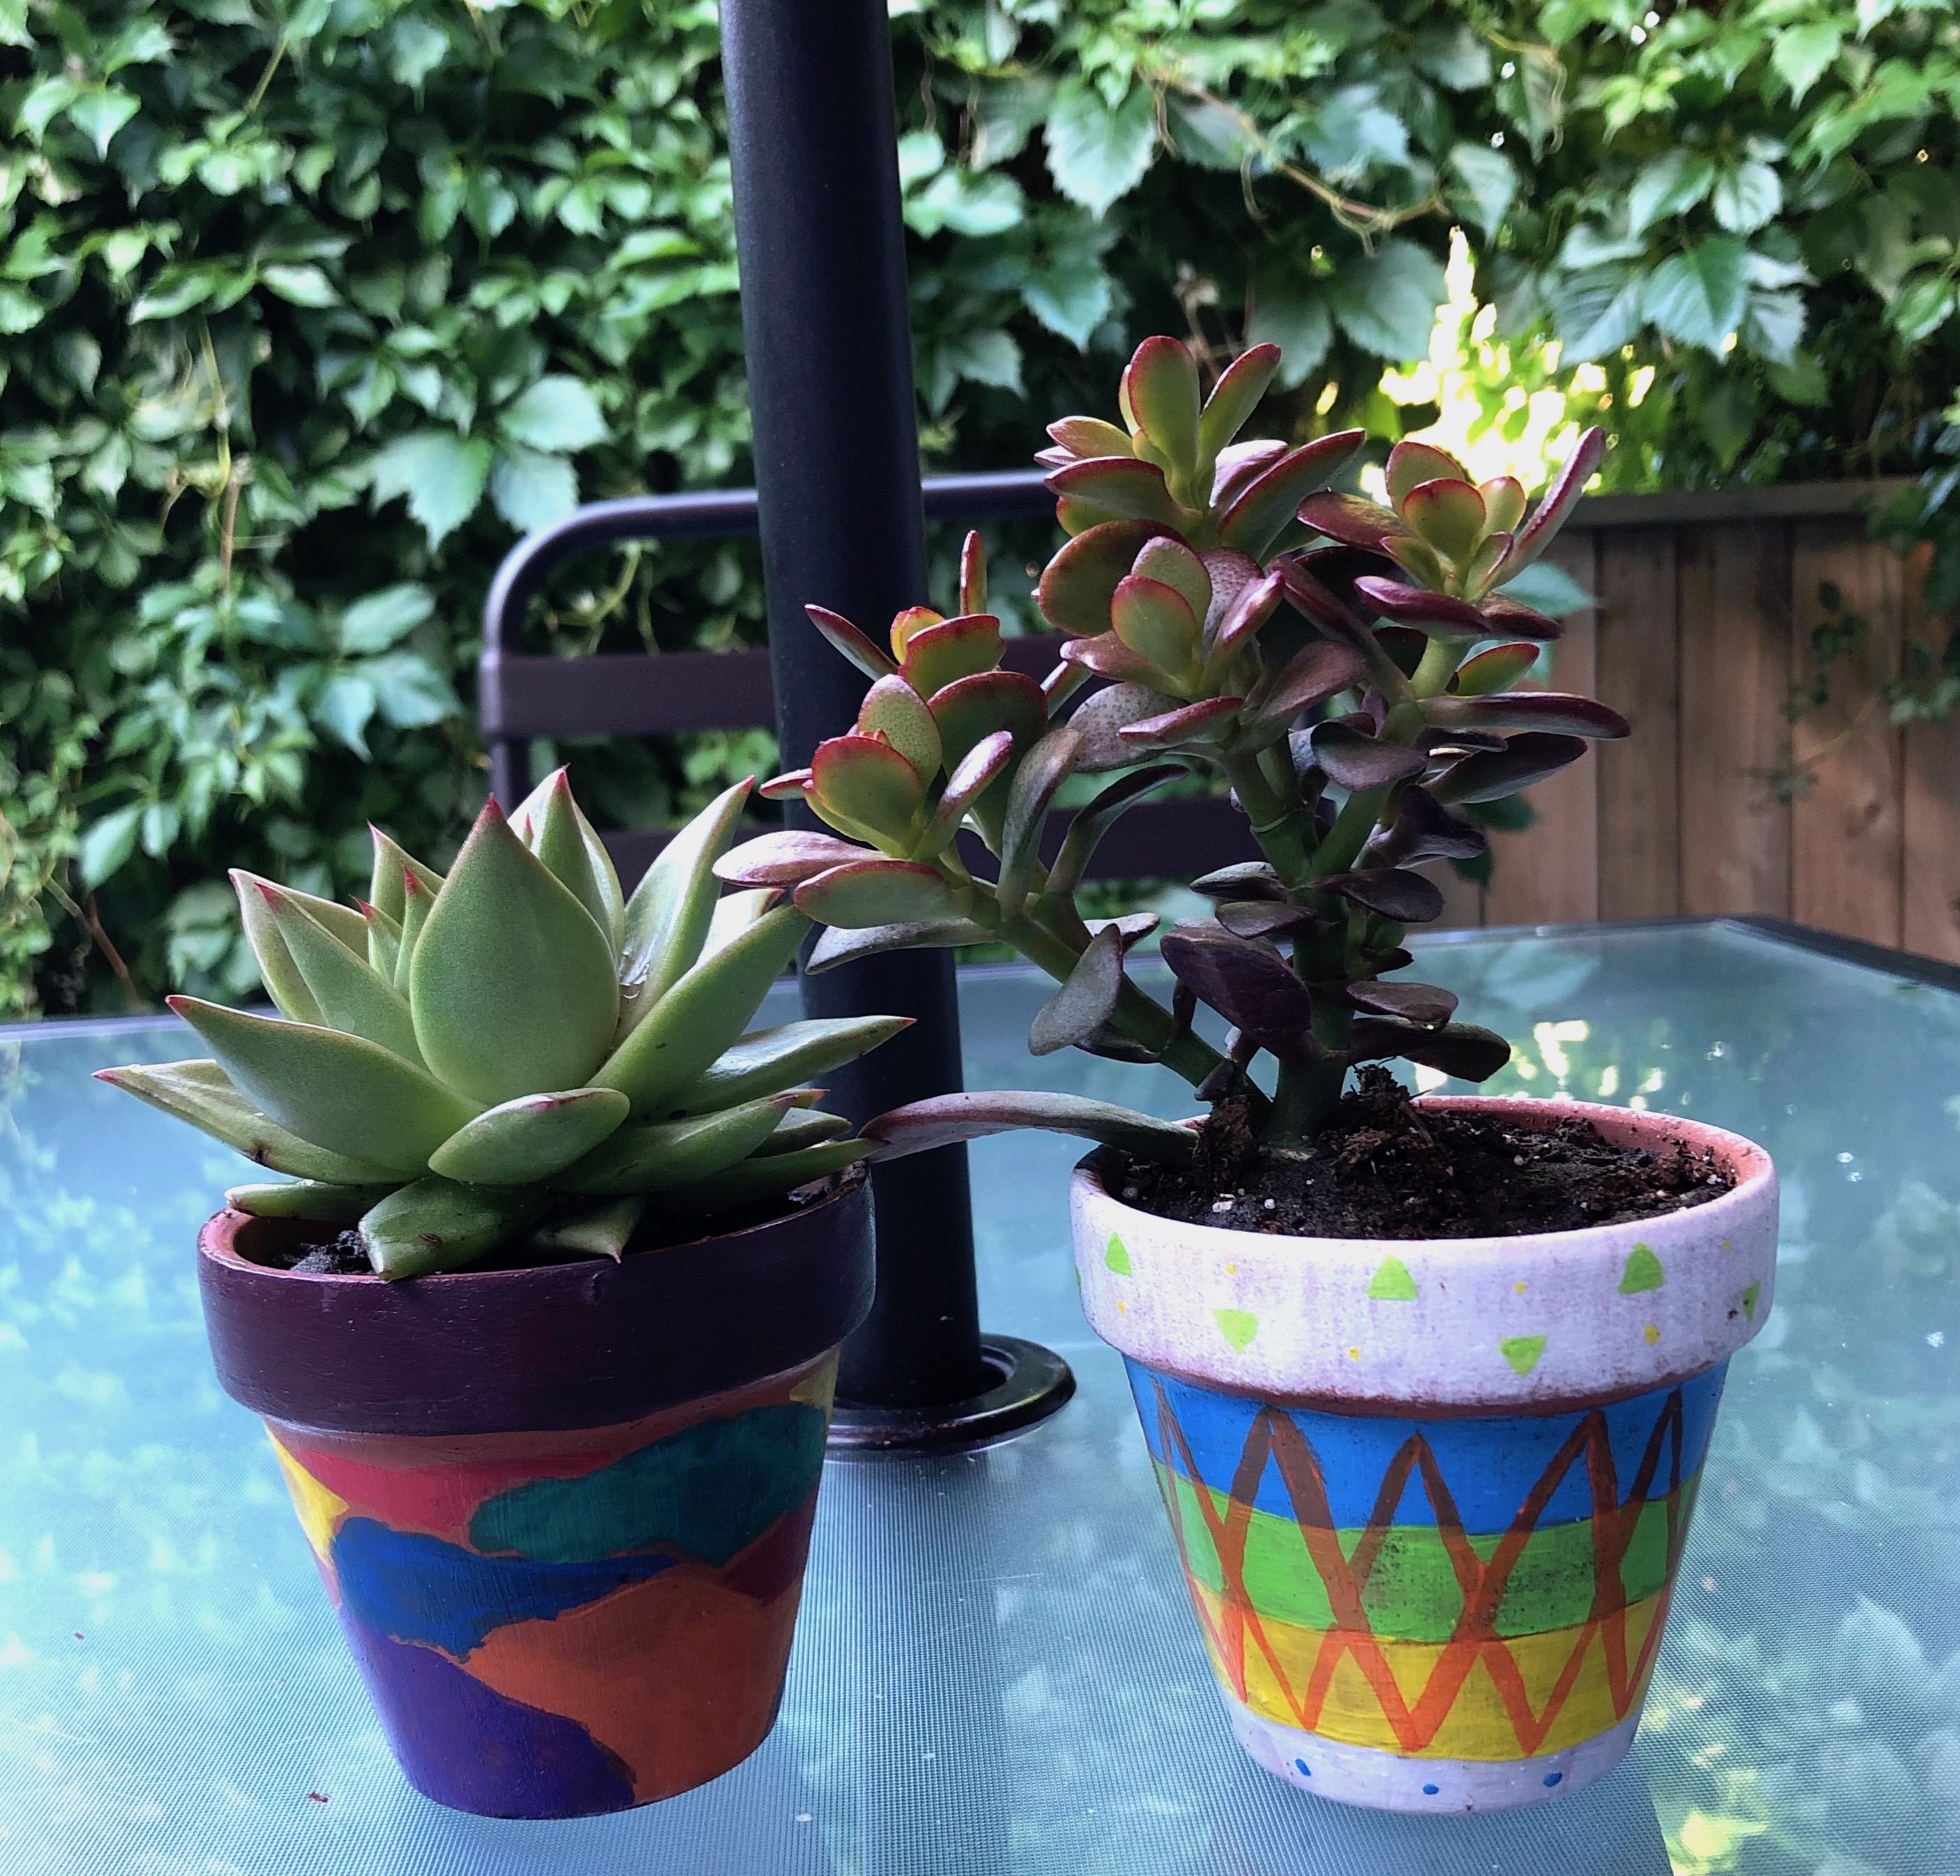 Two small succulents in painted flower pots.